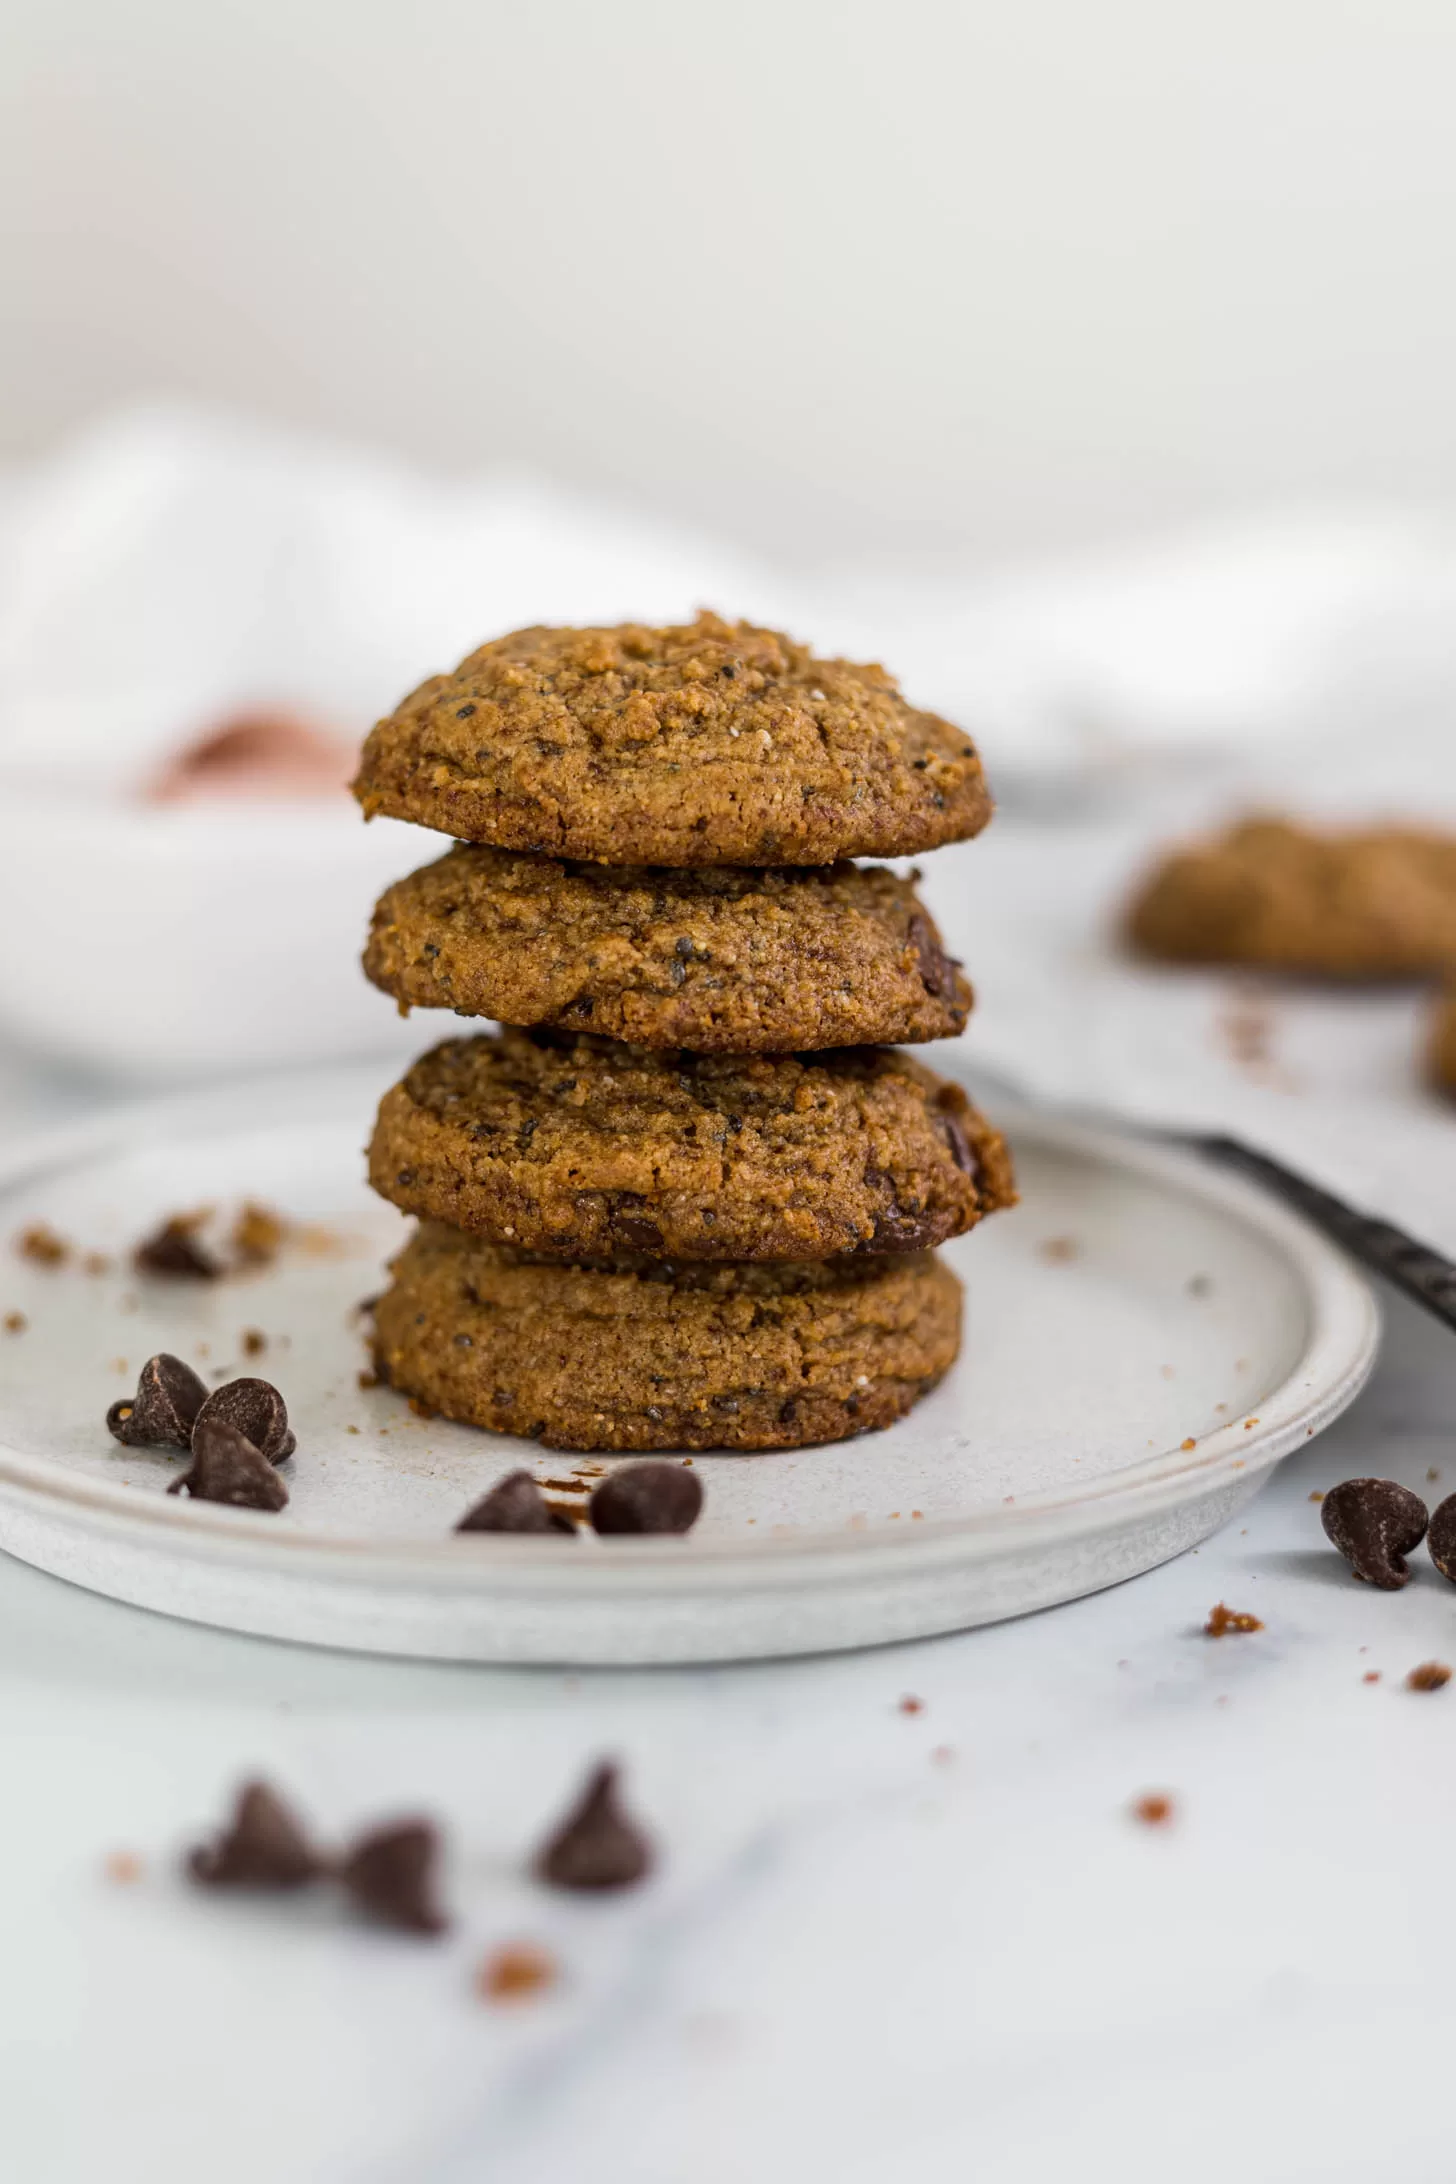 A stack of tahini cookies on a plate.